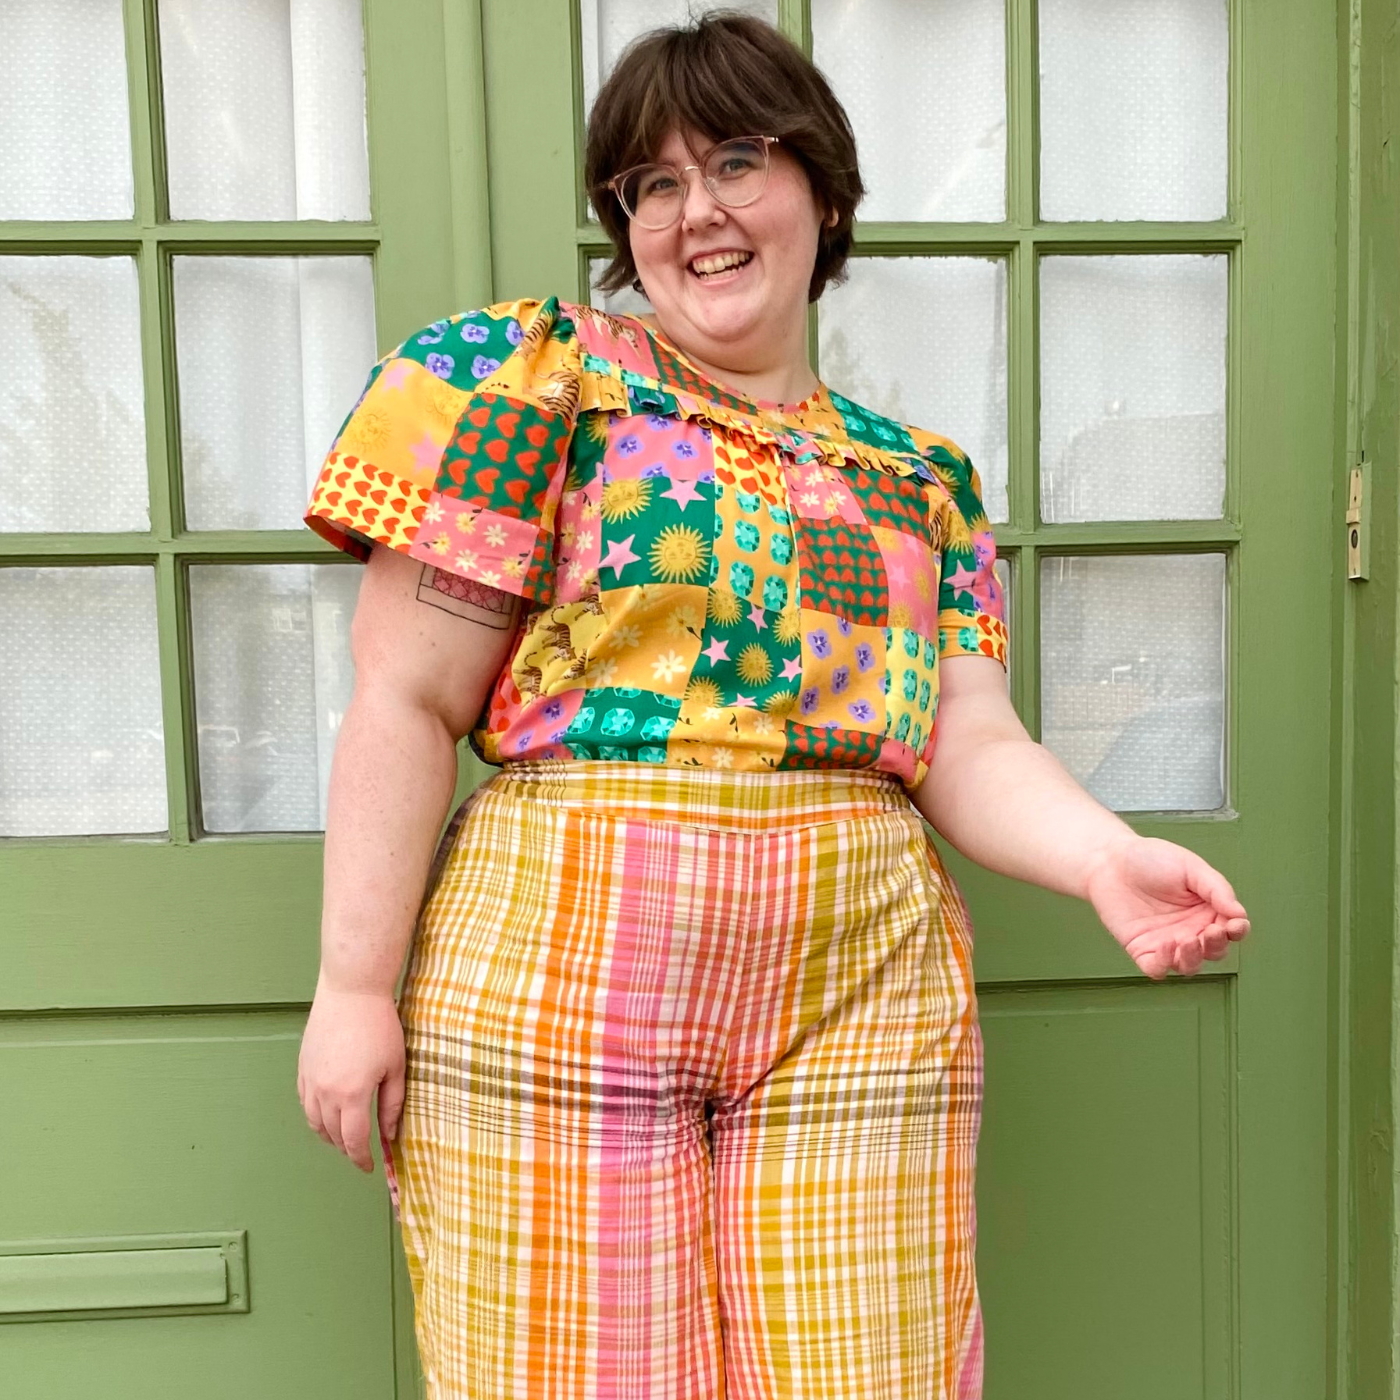 Caroline stands looking at the camera smiling in front of two green doors, the top half of which has rows of small rectangular windows. White curtains peek through the windows. Caroline wears a short-sleeved shirt with a patchwork print with small square patches of a number of designs, including red hearts on a green background, purple flowers floating on an orange background, pink stars and orange circles on a pink background and more. She also wears orange, yellow, pink and white plaid pants. Her left hand is held up and a little bit in front and her right hand is down by her side.